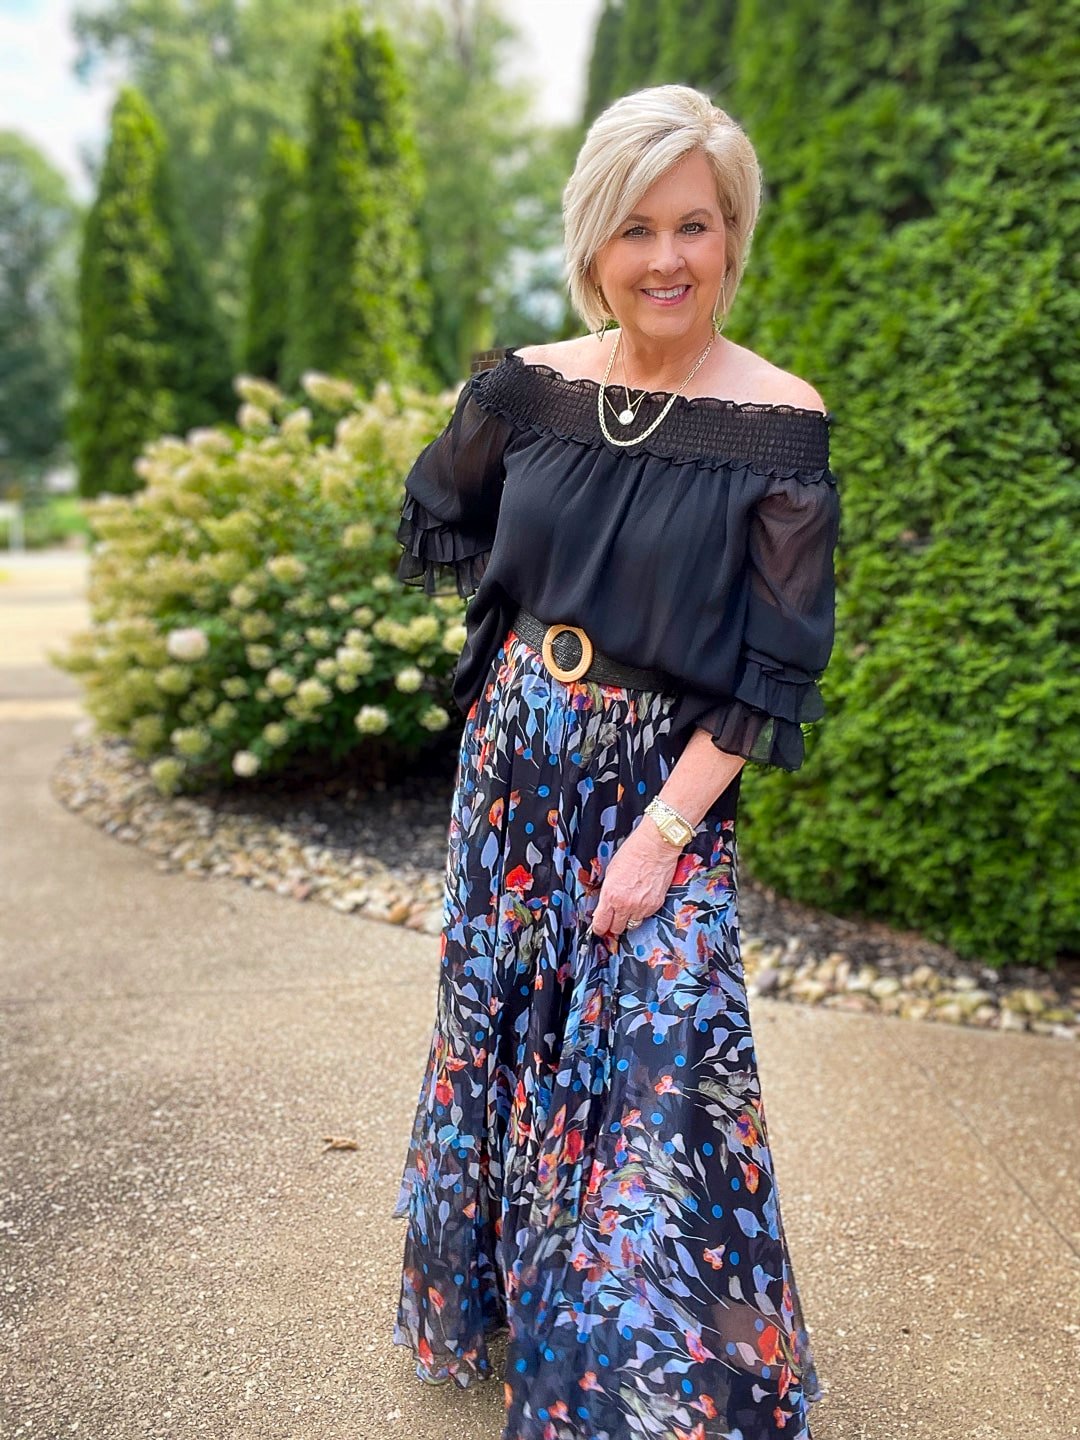 Over 40 Fashion Blogger, Tania Stephens is styling a floral chiffon skirt for a fall wedding 10